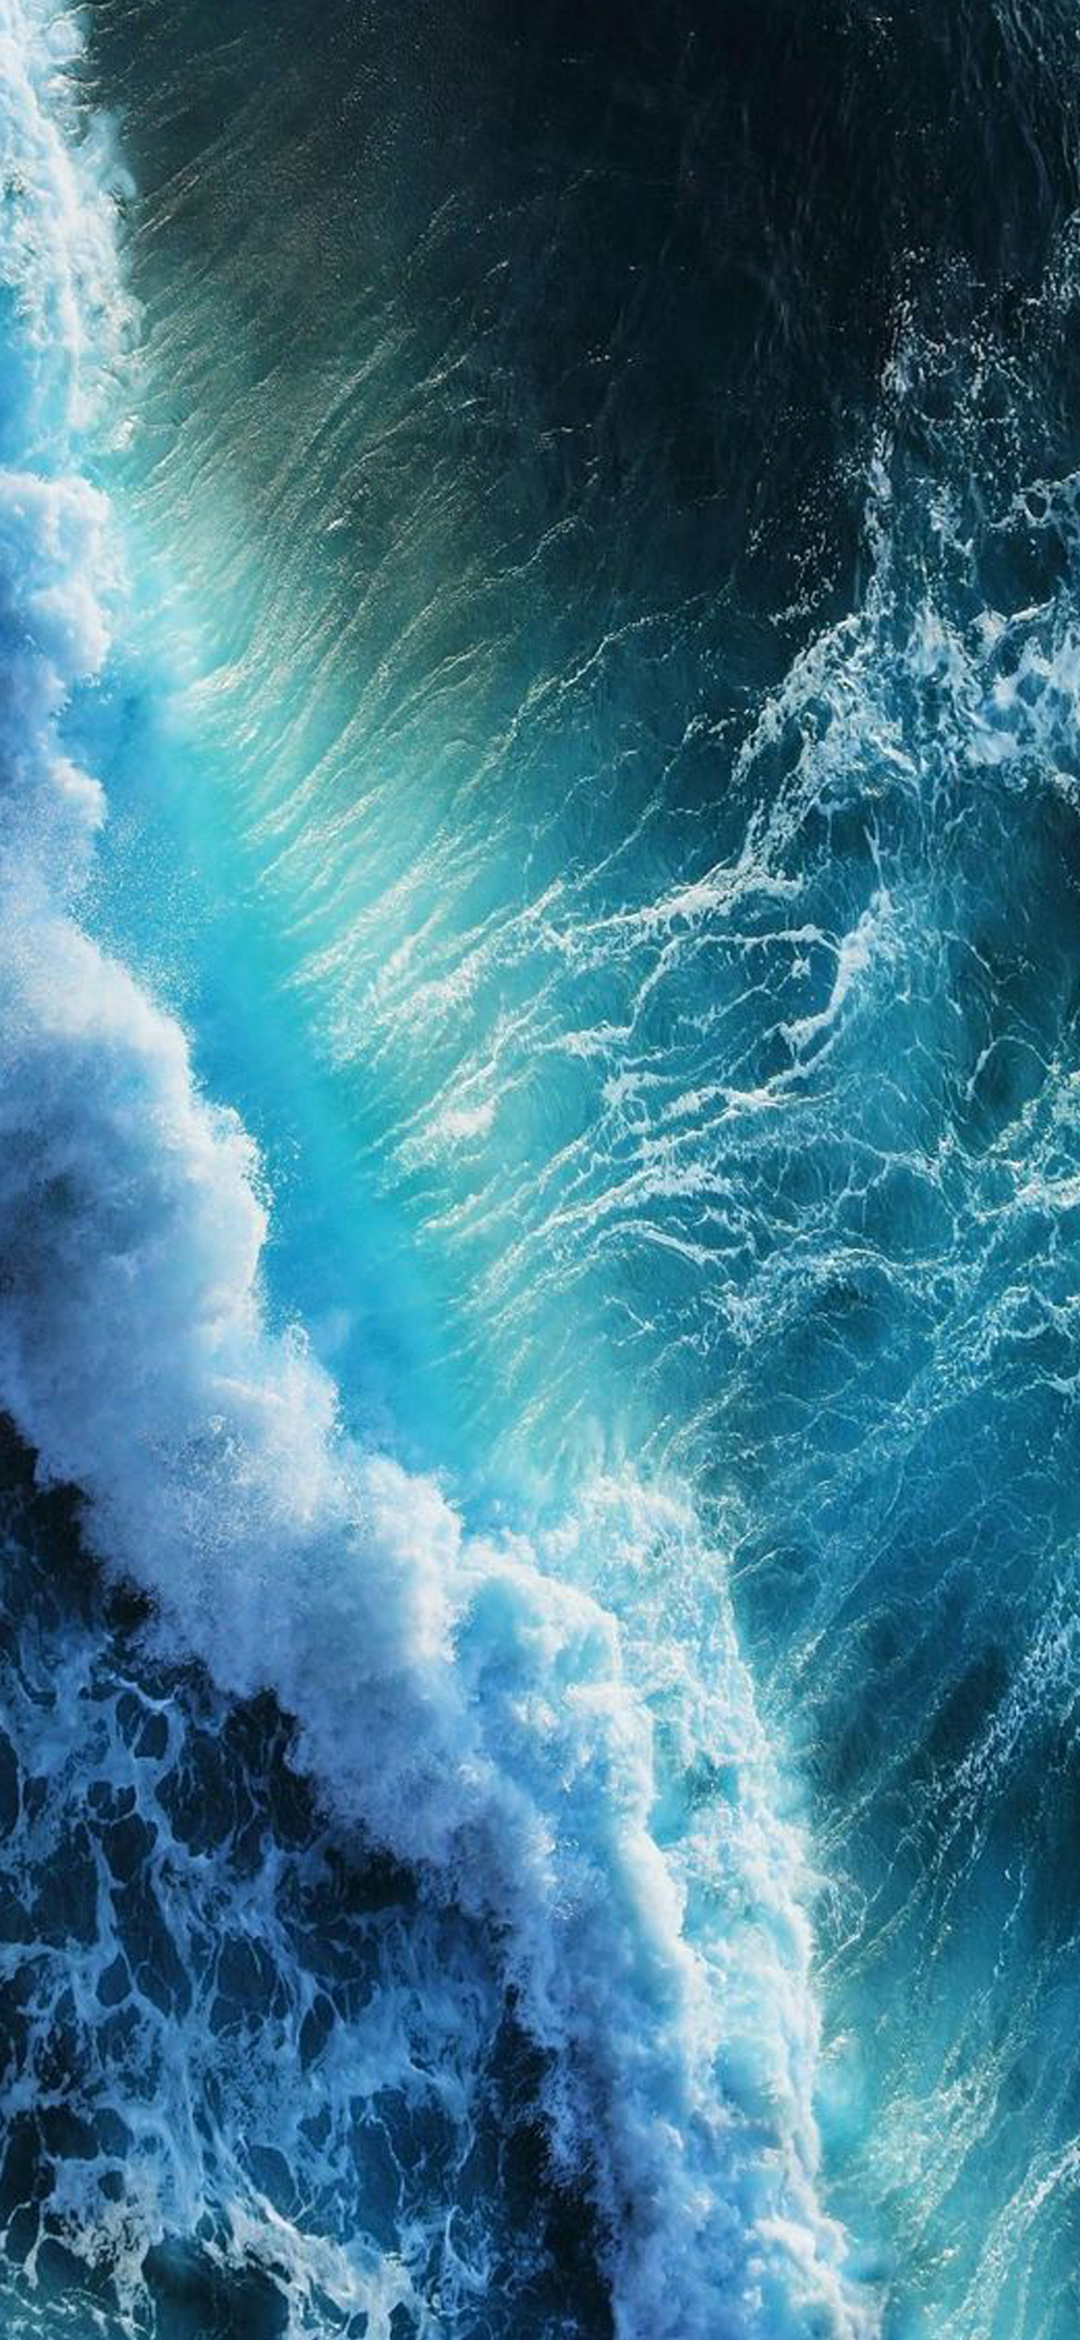 Beach Wallpaper for Phone with Close Up Wave Photo Wallpaper. Wallpaper Download. High Resolution Wallpaper